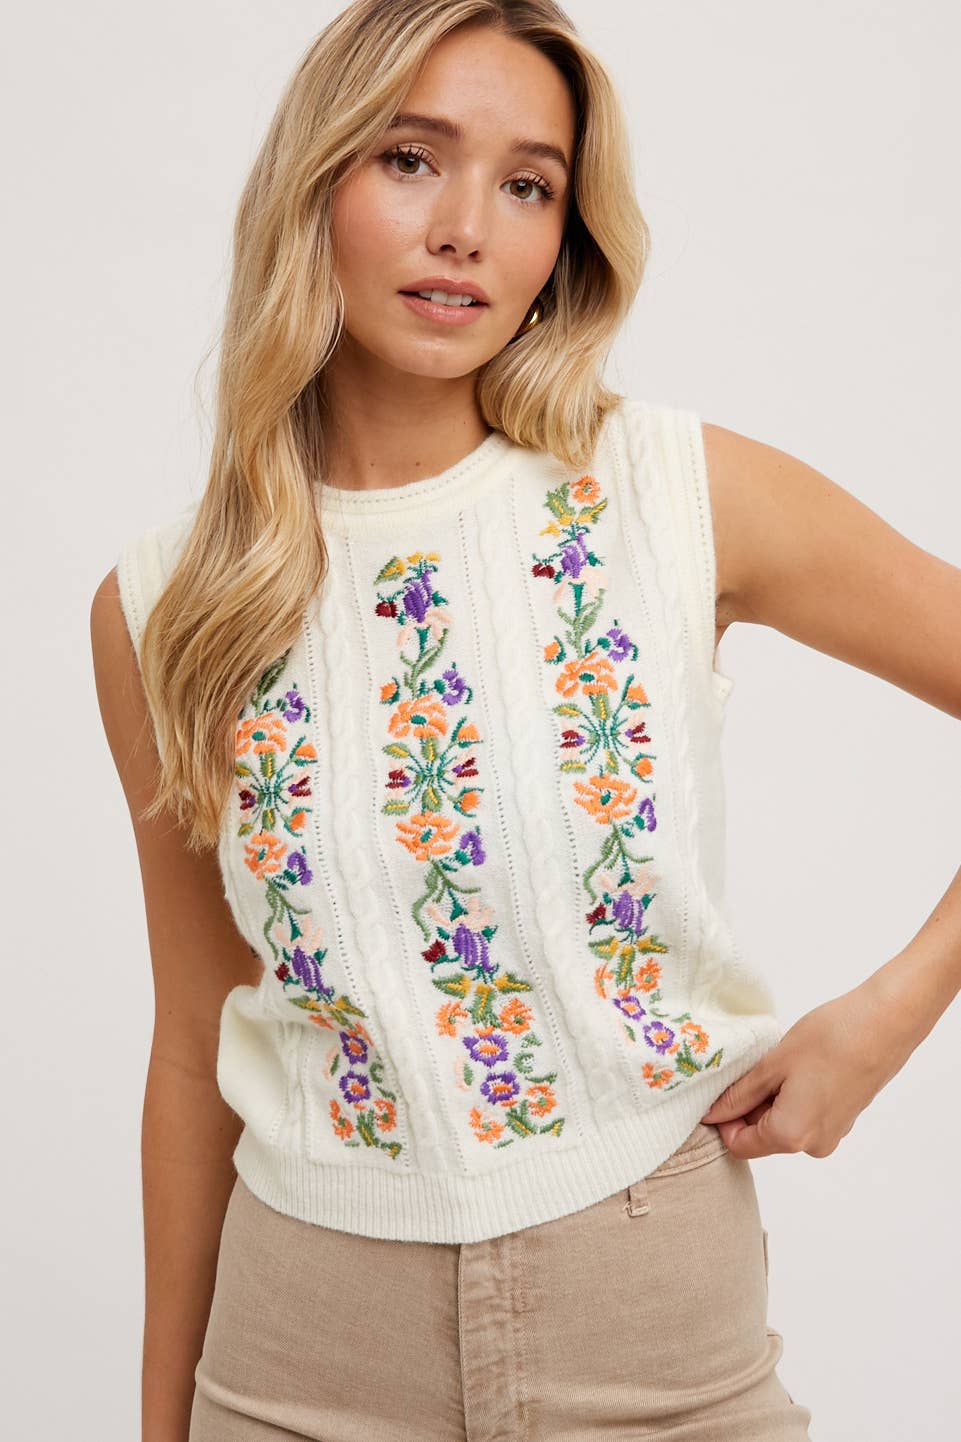 Bluivy - EMBROIDERED SLEEVELESS KNIT TANK TOP